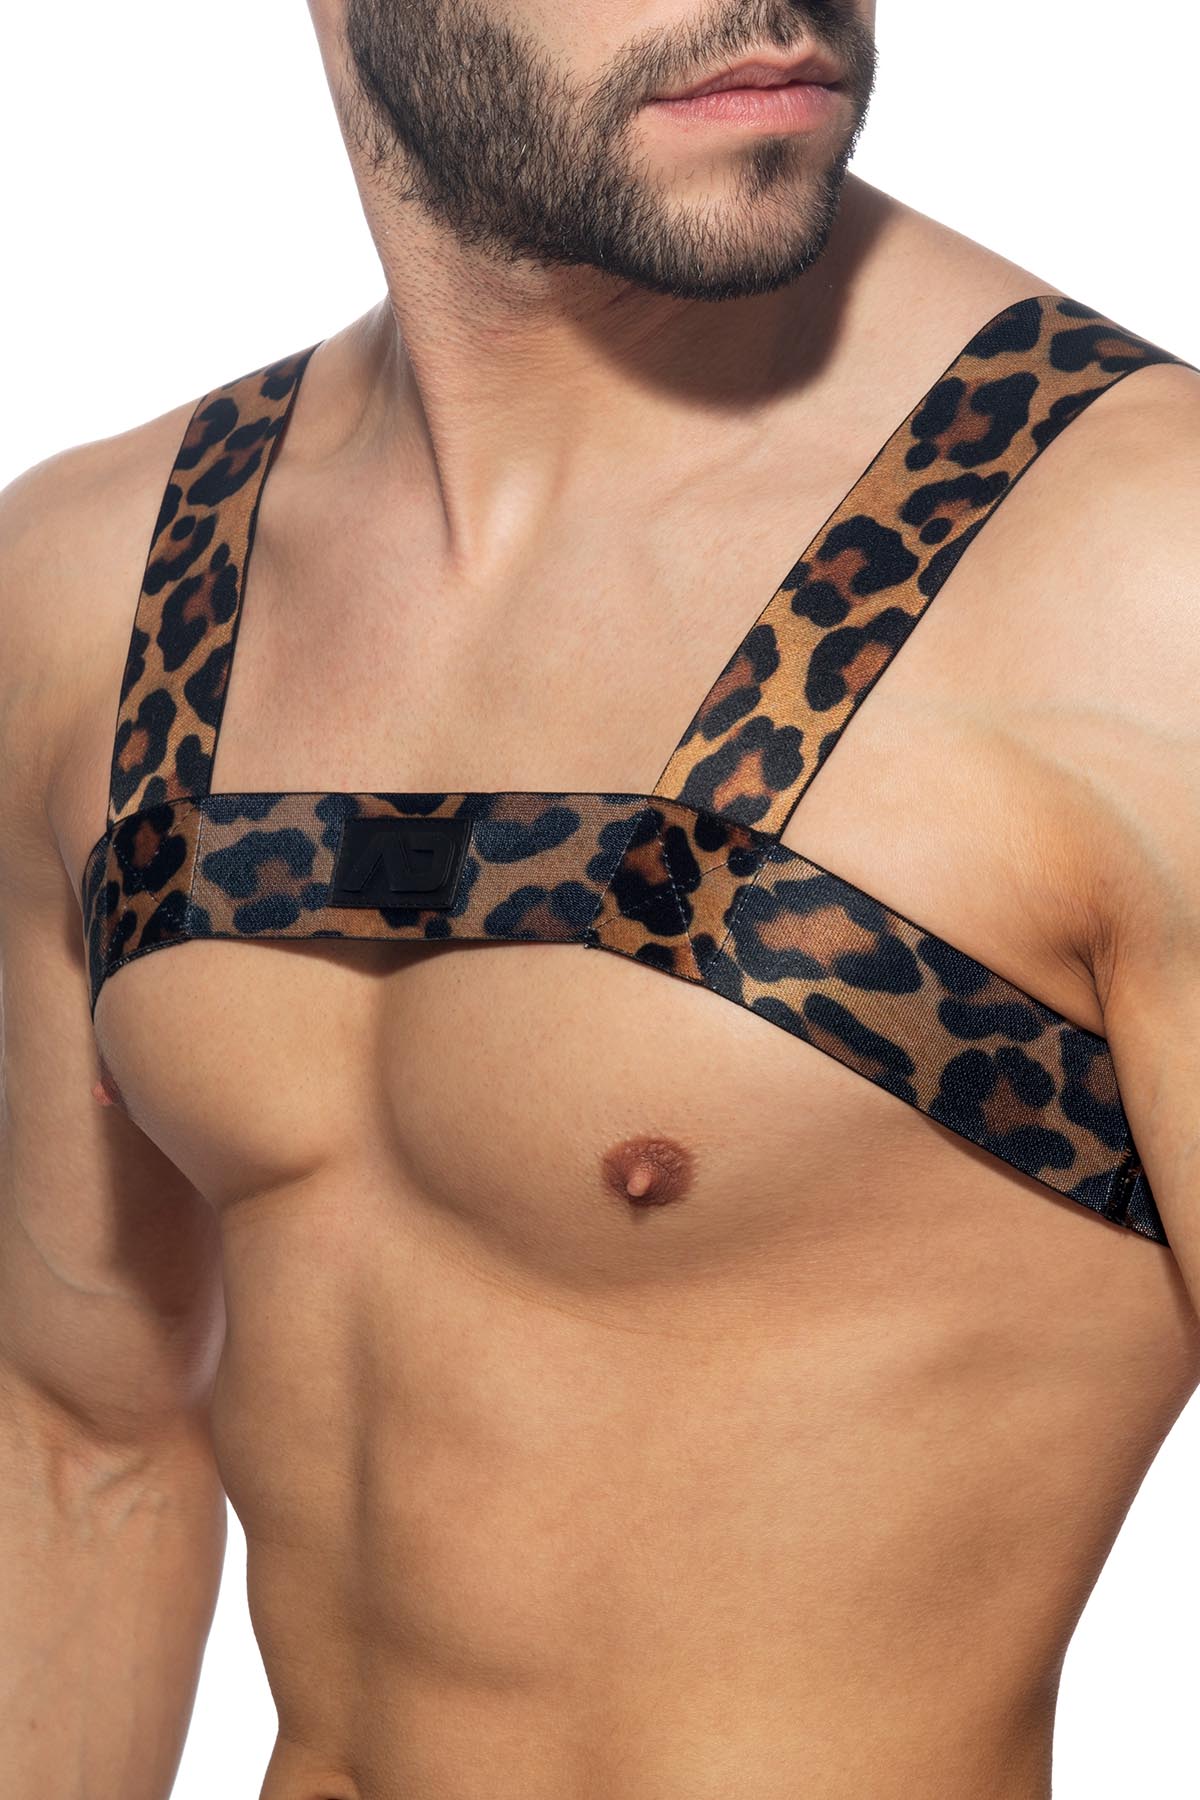 https://cdn11.bigcommerce.com/s-6ehfk/images/stencil/original/products/11861/34526/Addicted-Leopard-Elastic-Harness-AD1183-13-S__06881.1683759710.jpg?c=2?c=2&imbypass=on&imbypass=on